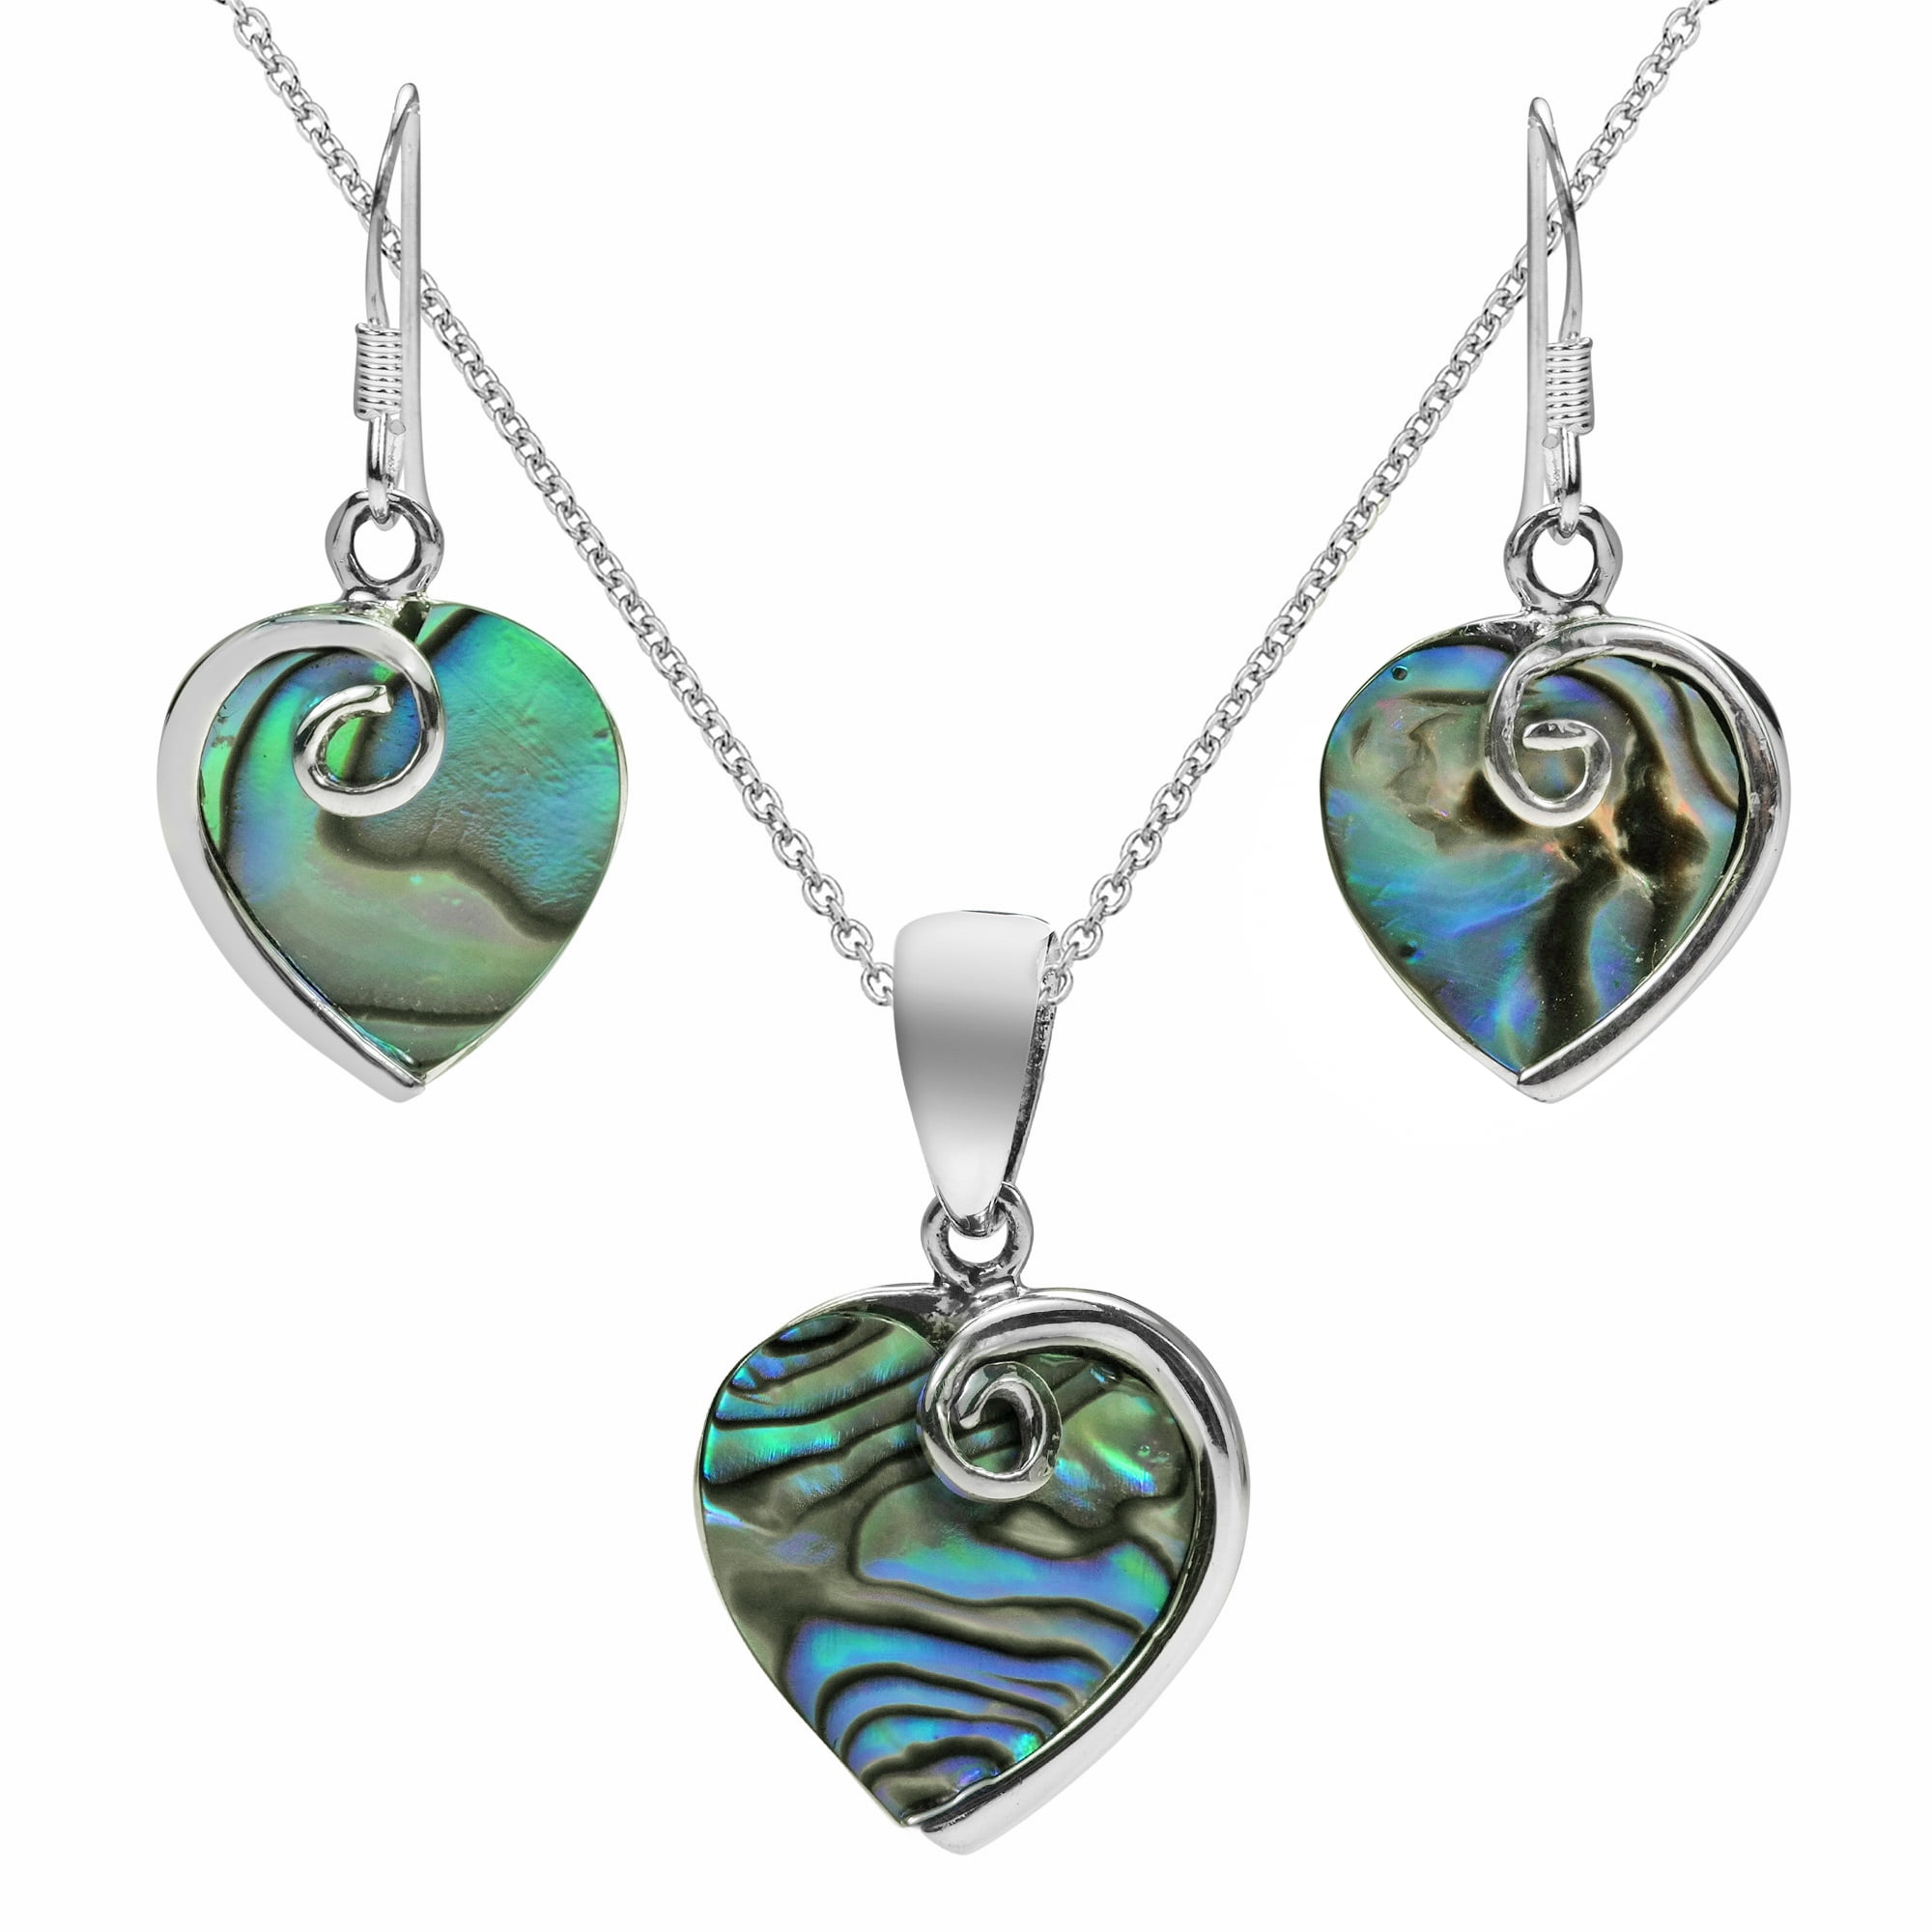 Abalone Horseshoe Lucky Pendant Silver Plated Necklace Earrings Under £15 